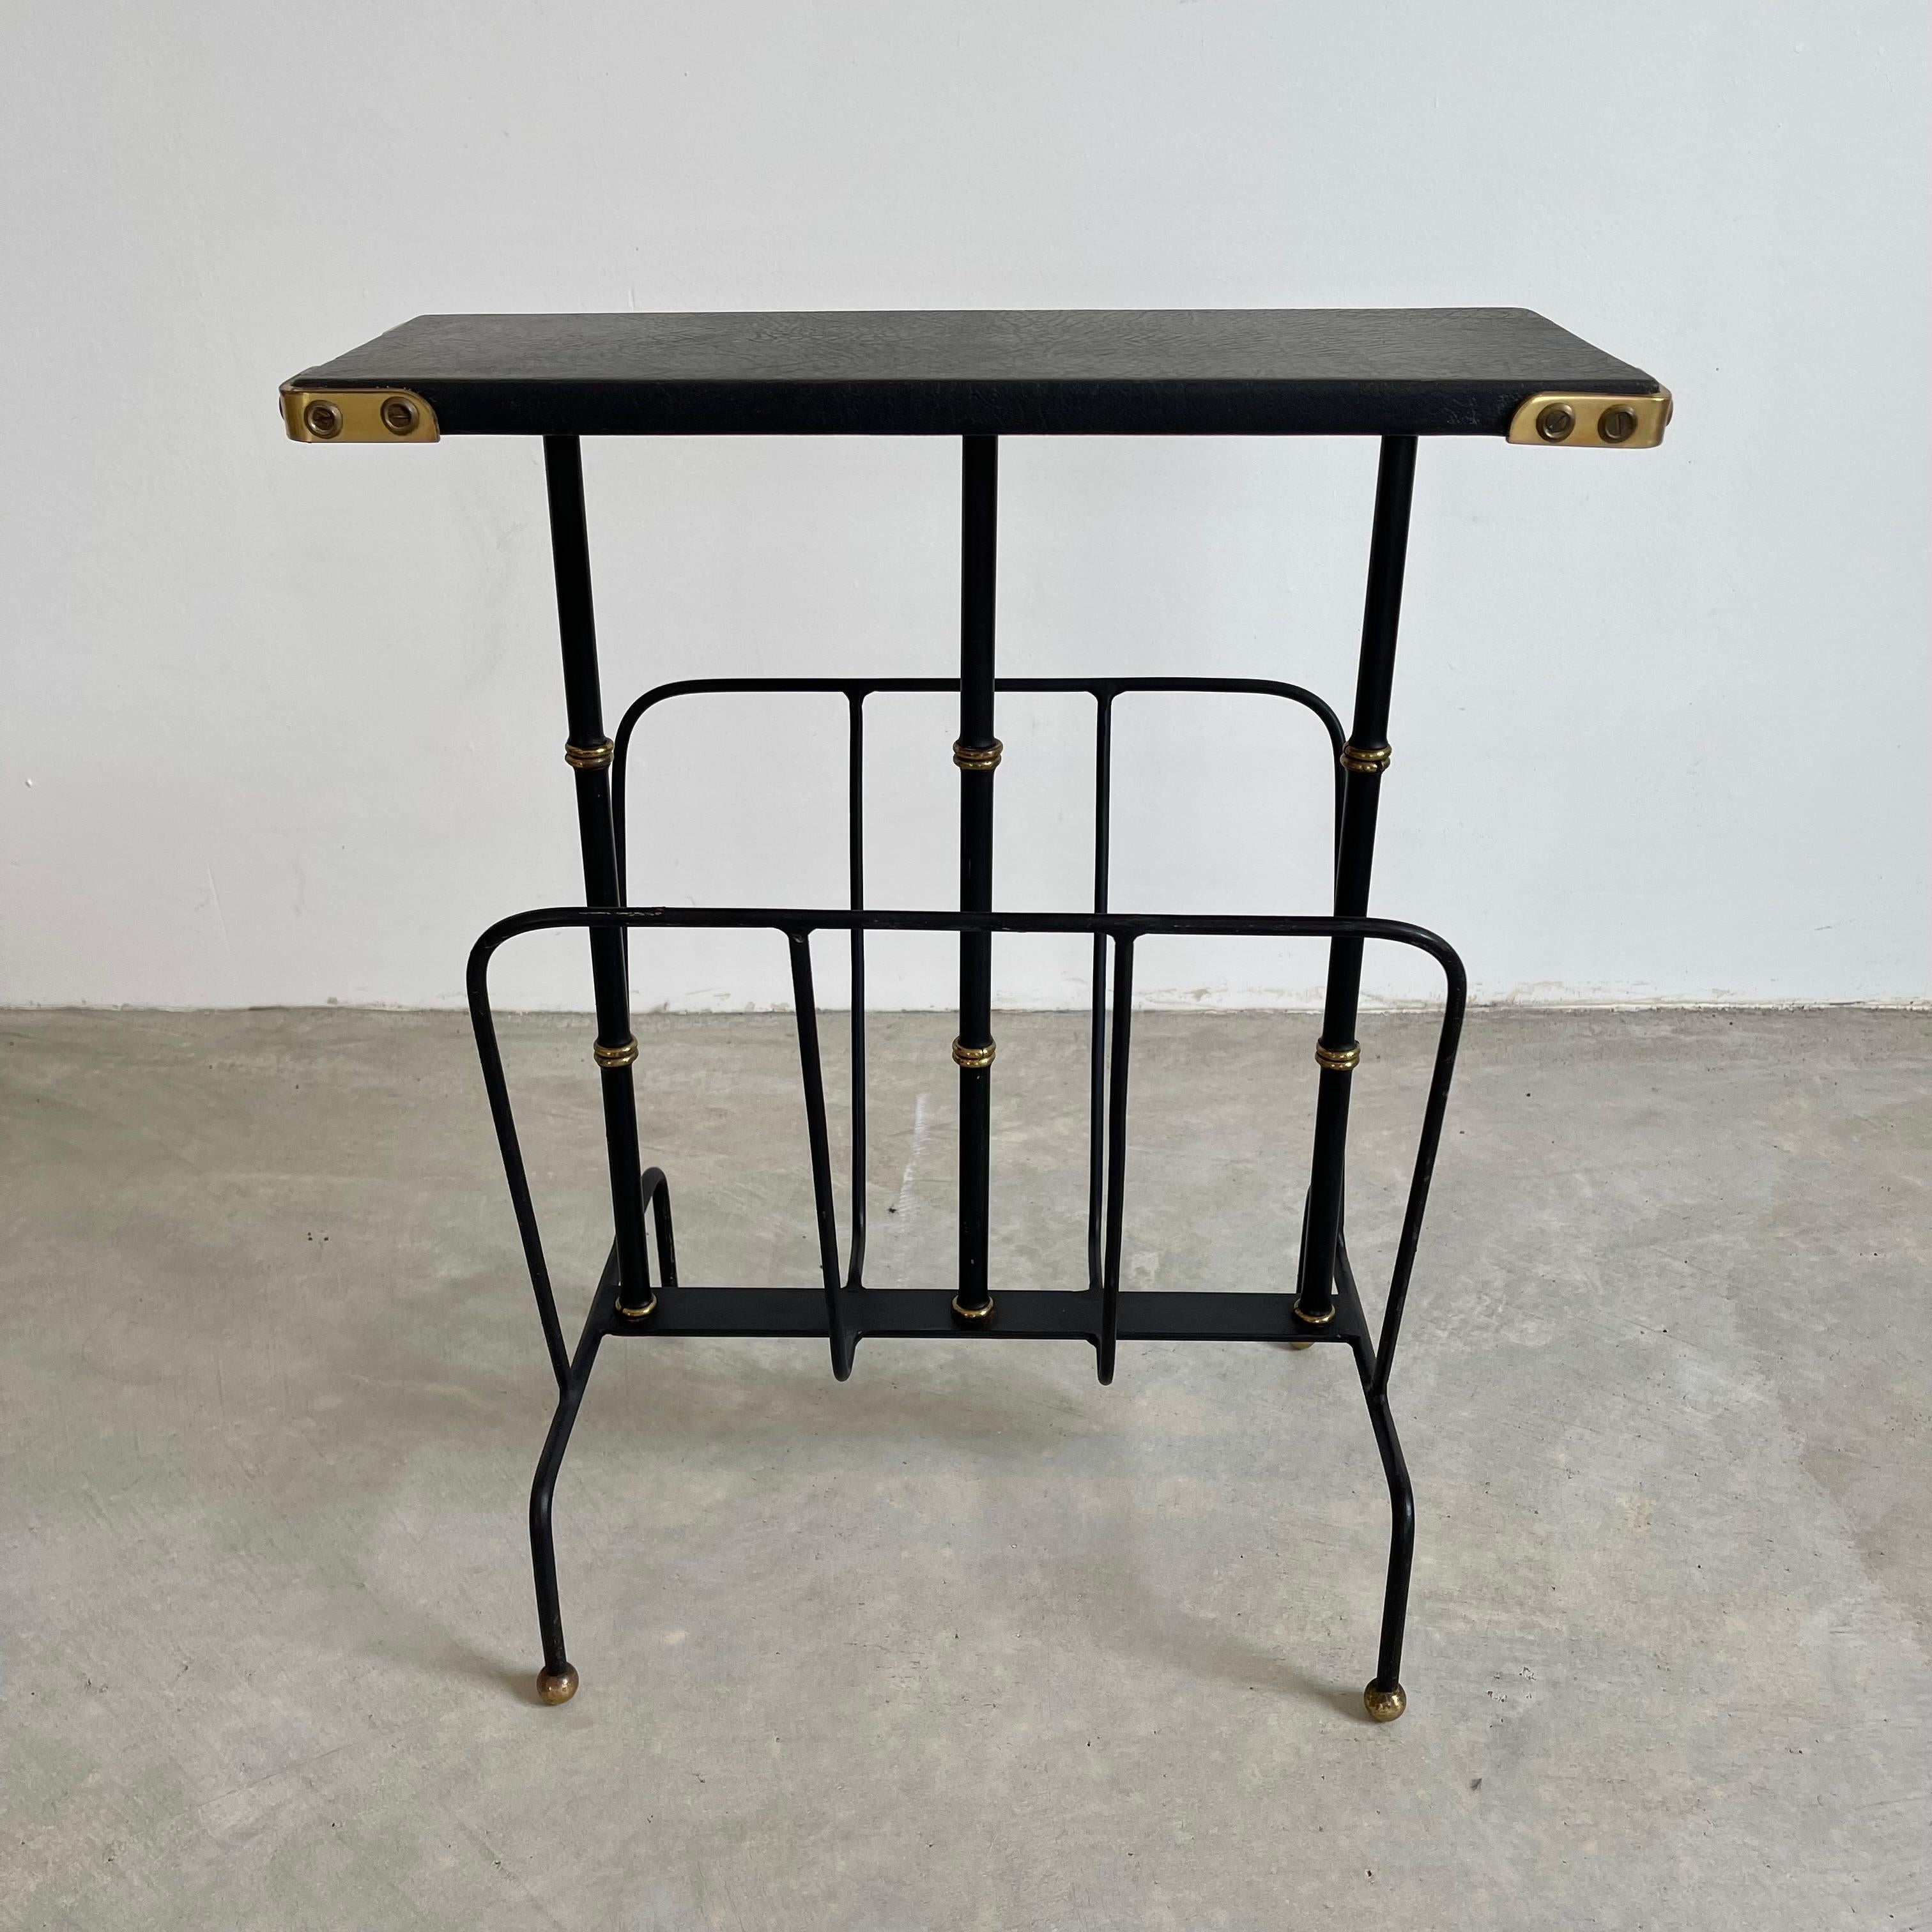 Fantastic leather side table by French designer Jacques Adnet. Leather wrapped legs with brass detailing, and brass ball feet. Metal rack underneath the slender leather table top for storing books or magazines. Edge of tabletop is wrapped in black